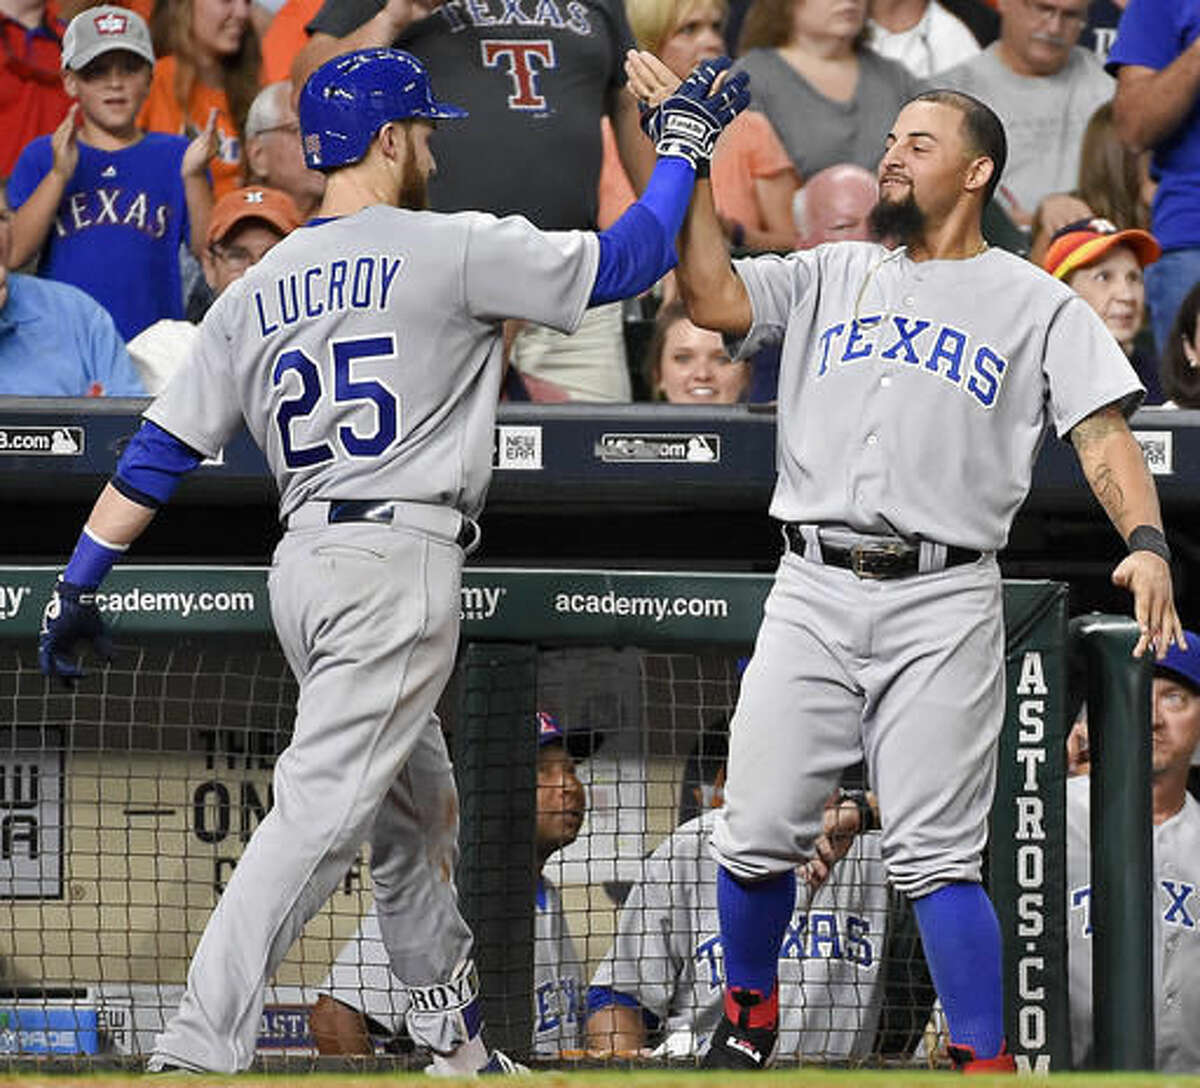 Texas Rangers' Jonathan Lucroy (25) celebrates his solo home run off Houston Astros' relief pitcher Tony Sipp with Rougned Odor in the eighth inning of a baseball game, Saturday, Aug. 6, 2016, in Houston. (AP Photo/Eric Christian Smith)